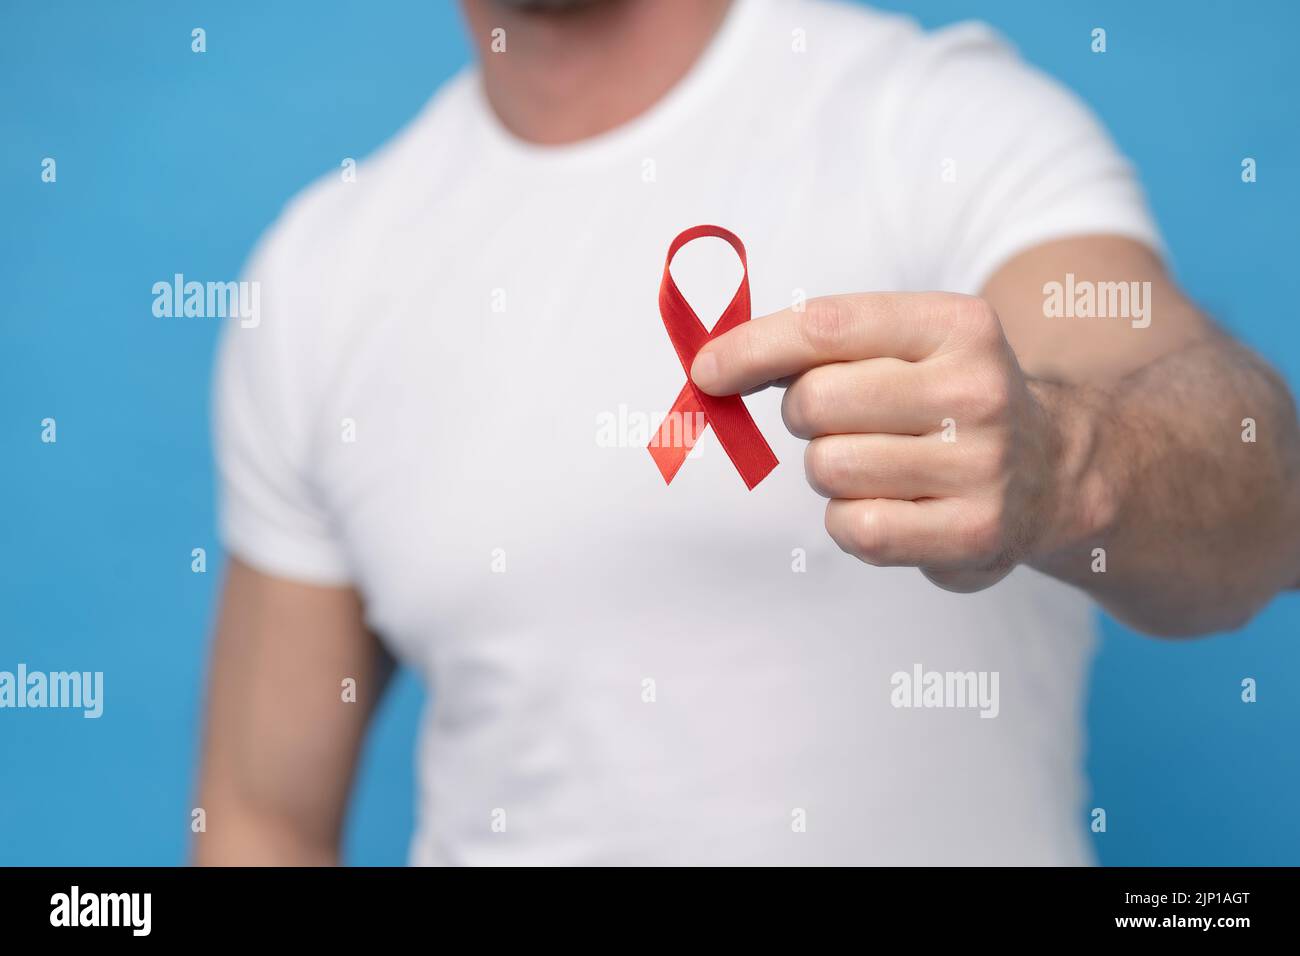 Man with red ribbon bow AIDS awareness symbol in hand wearing a white t-shirt isolated on a blue background. Modern medicine and healthcare. AIDS awareness concept. No face visible. Stock Photo